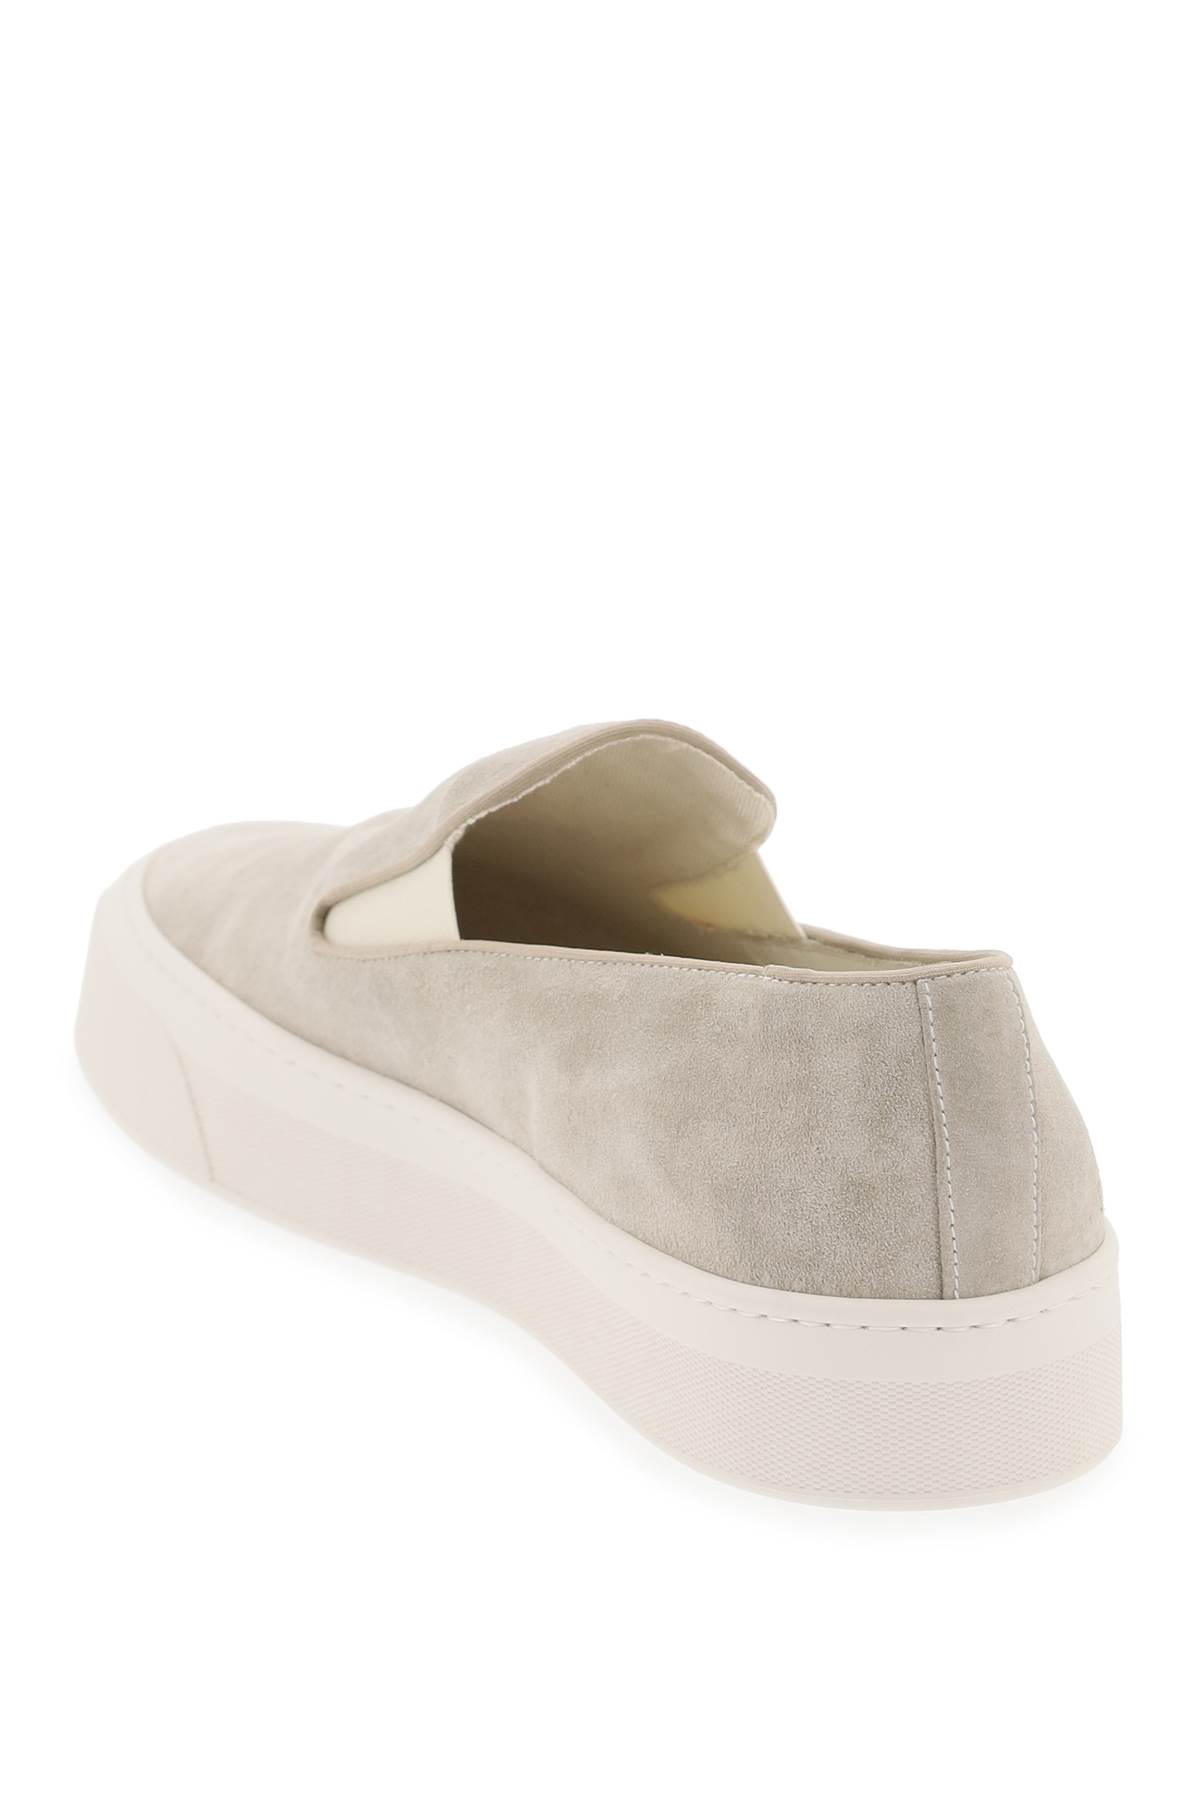 Shop Common Projects Slip-on Sneakers In Warm Grey (grey)